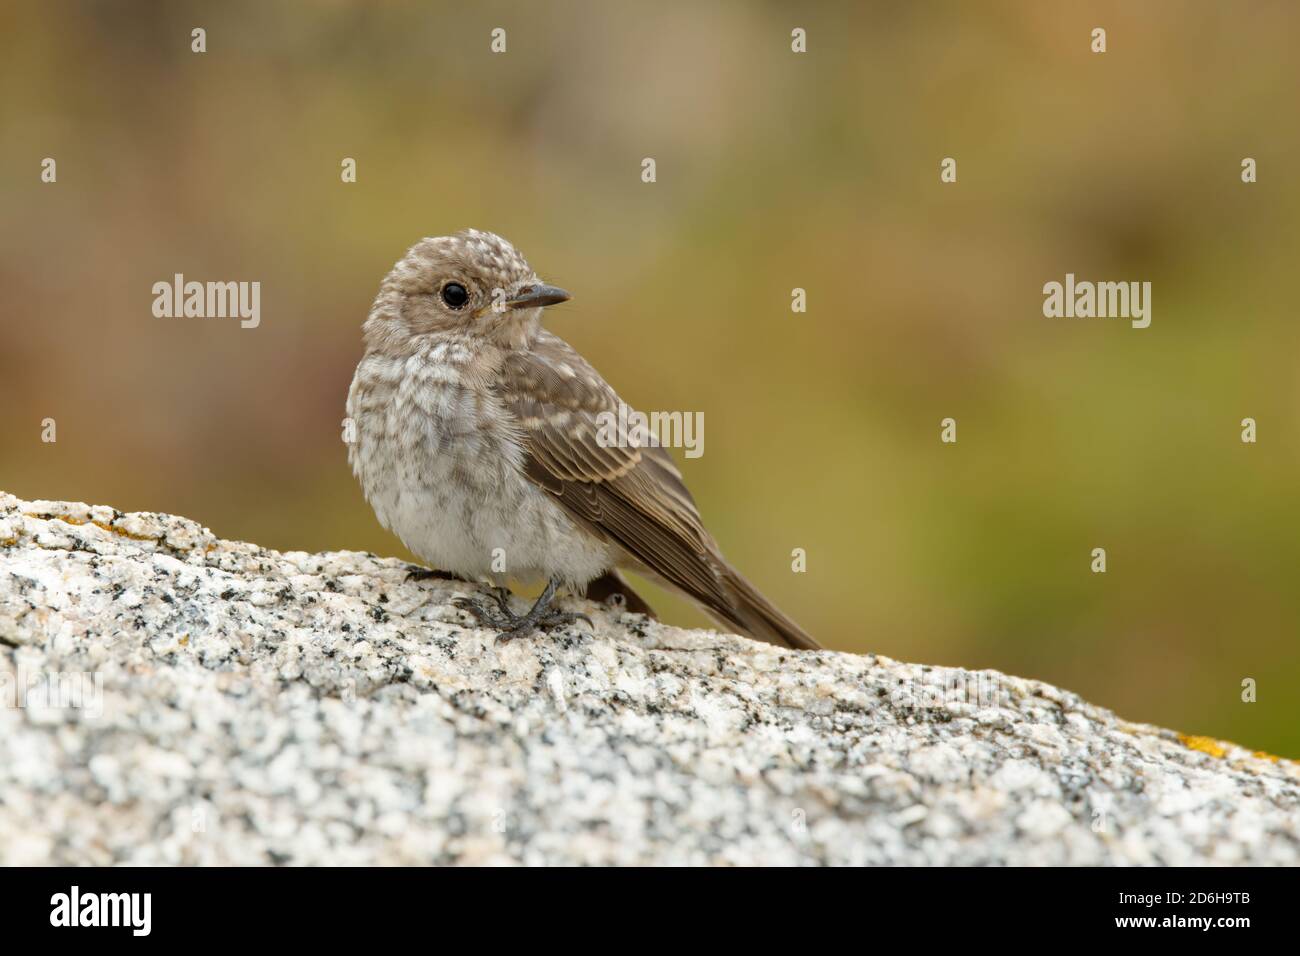 Spotted Flycatcher - Muscicapa striata sitting small passerine bird in the Old World flycatcher family, breeds in Europe and western Asia, migratory. Stock Photo